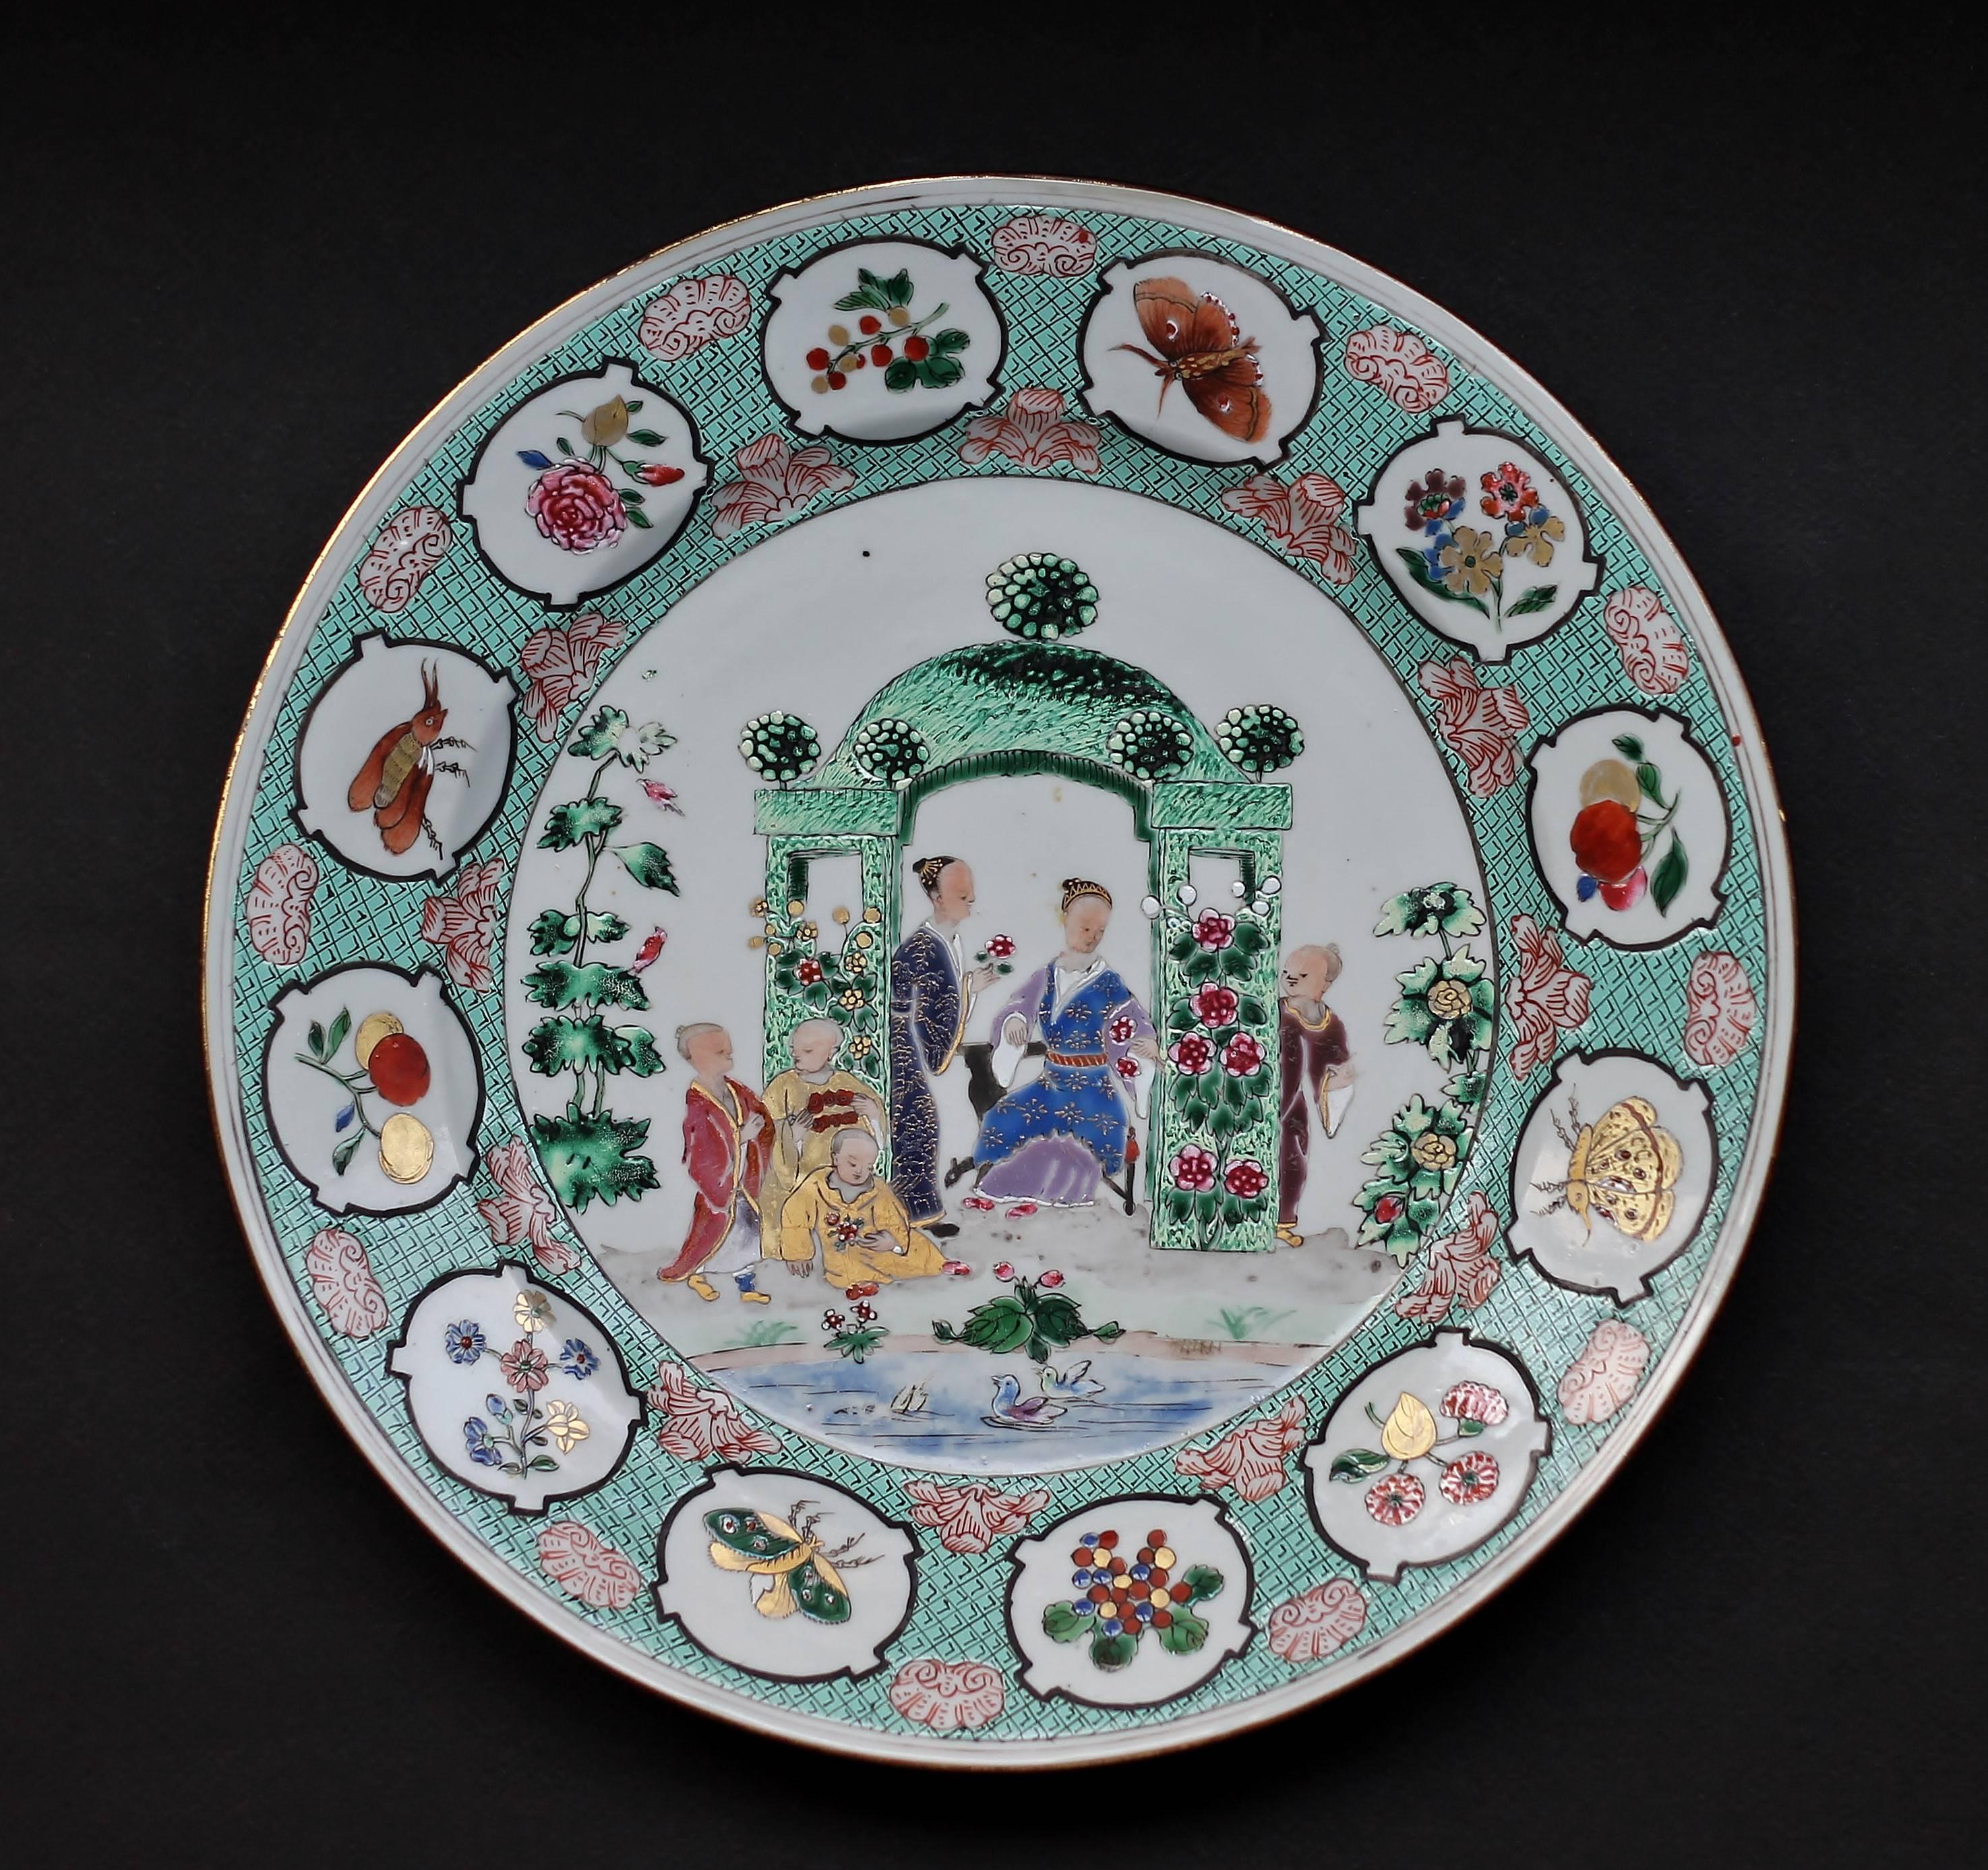 This enameled round dish with 'Arbor' design is decorated with a lady, servants and children by a pond, all dressed in Chinese costumes as perceived by the Europeans. Surrounding this scene are panels containing fruits, flowers and insects against a